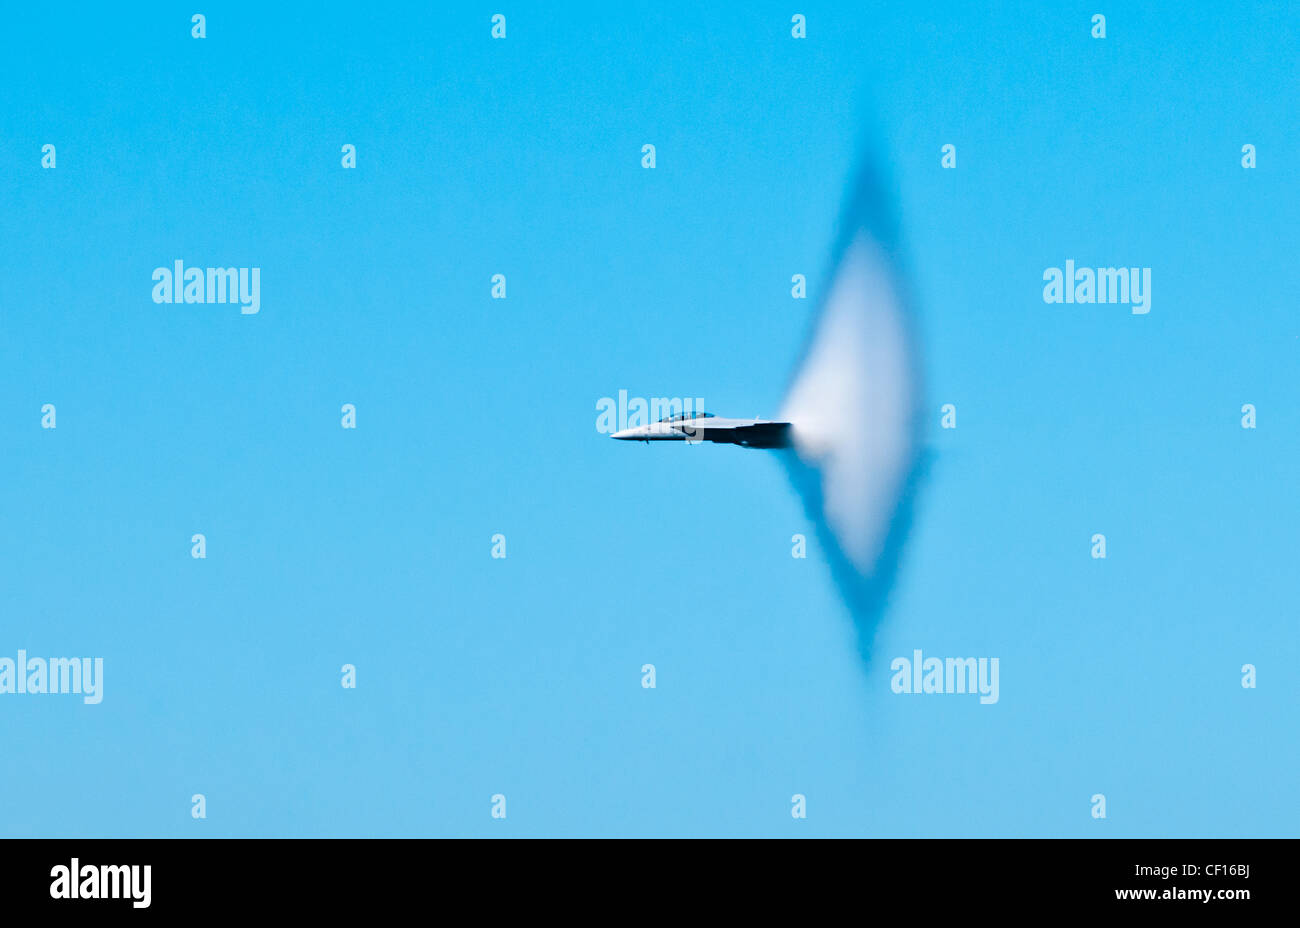 Military fighter jet breaking the sound barrier, Fleet Week Air Show, San Francisco, California, USA Stock Photo